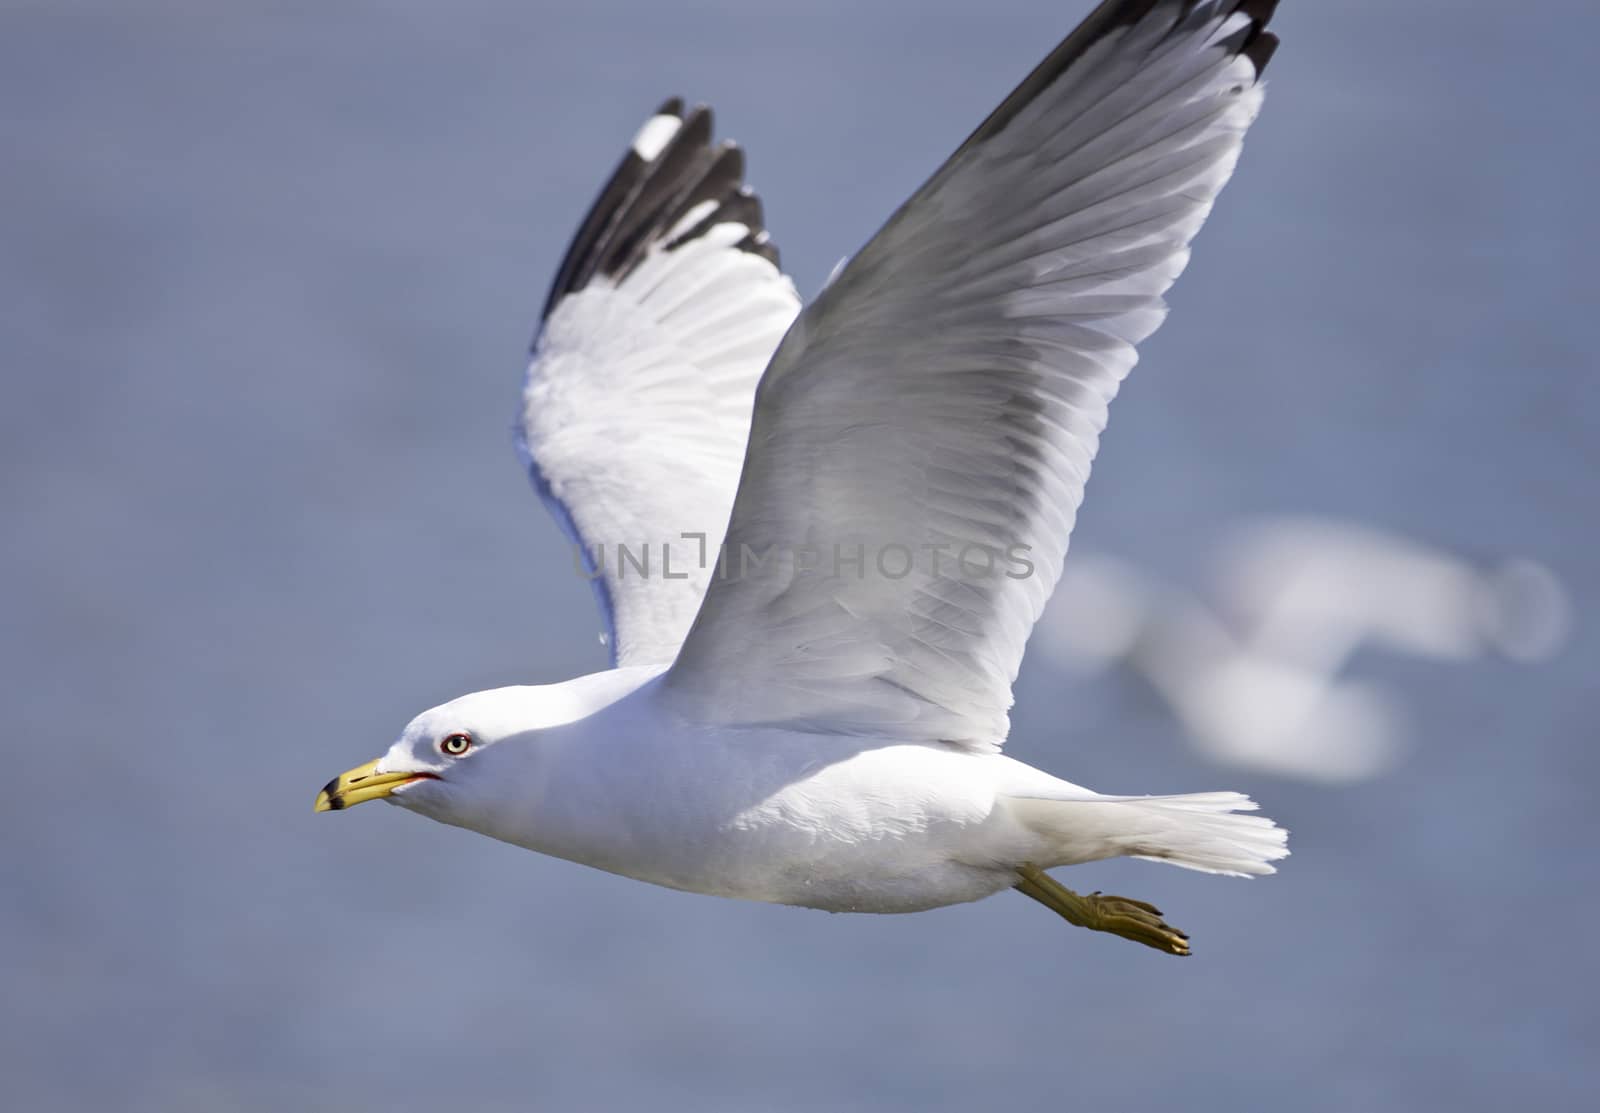 Beautiful picture with a flying gull by teo